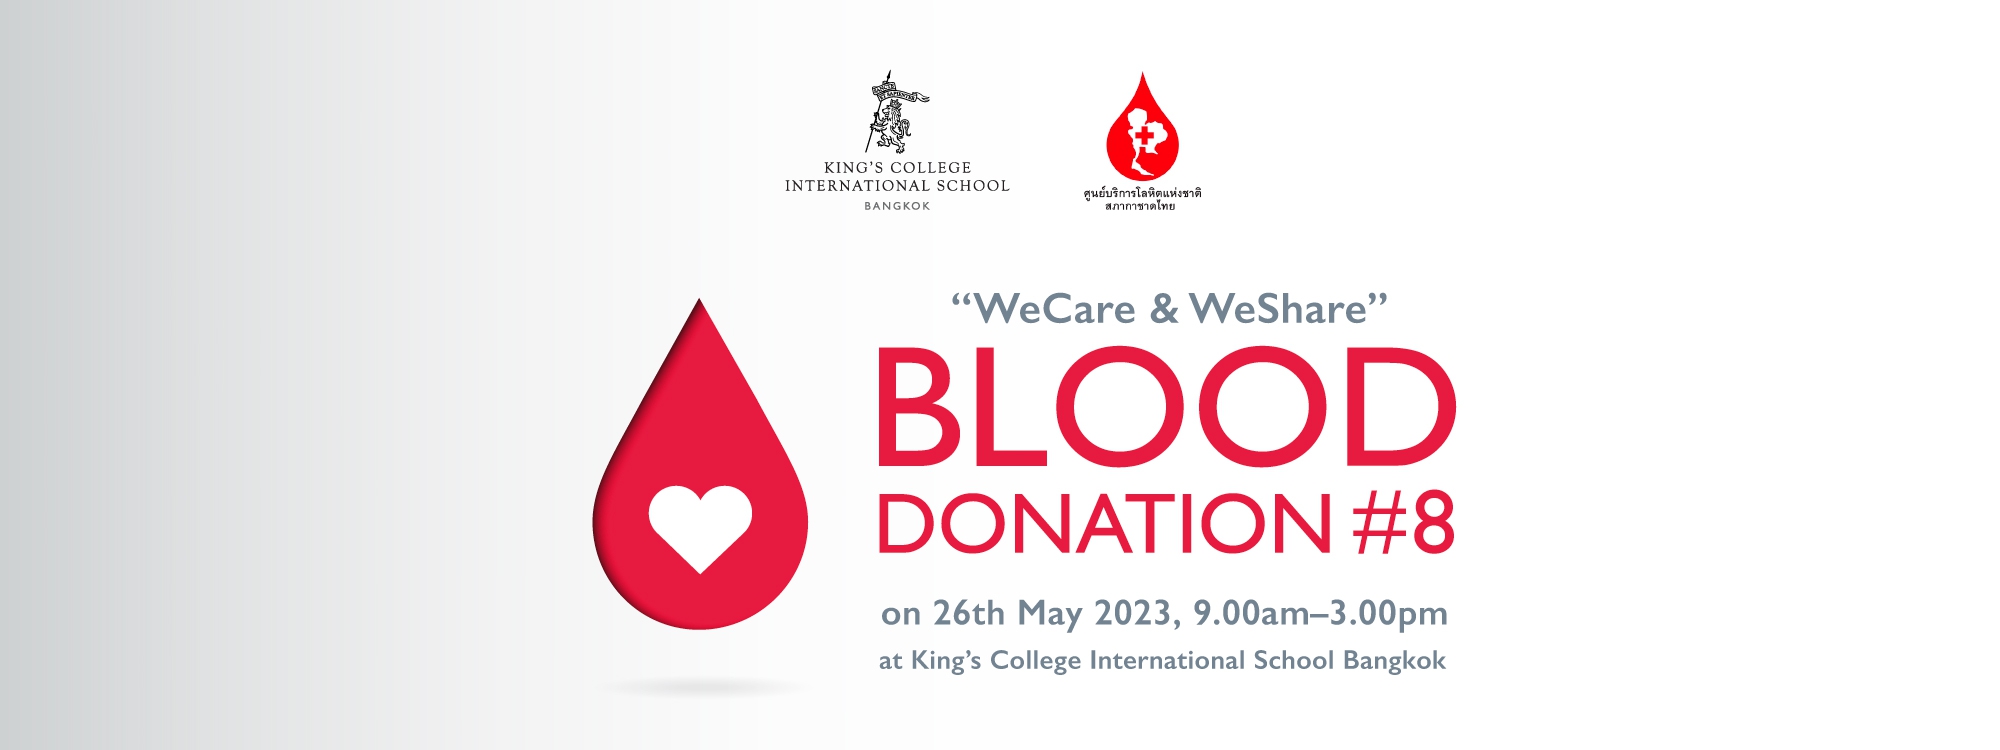 Donate blood and enjoy a free Dean & DeLuca drink and gift set from King’s Bangkok